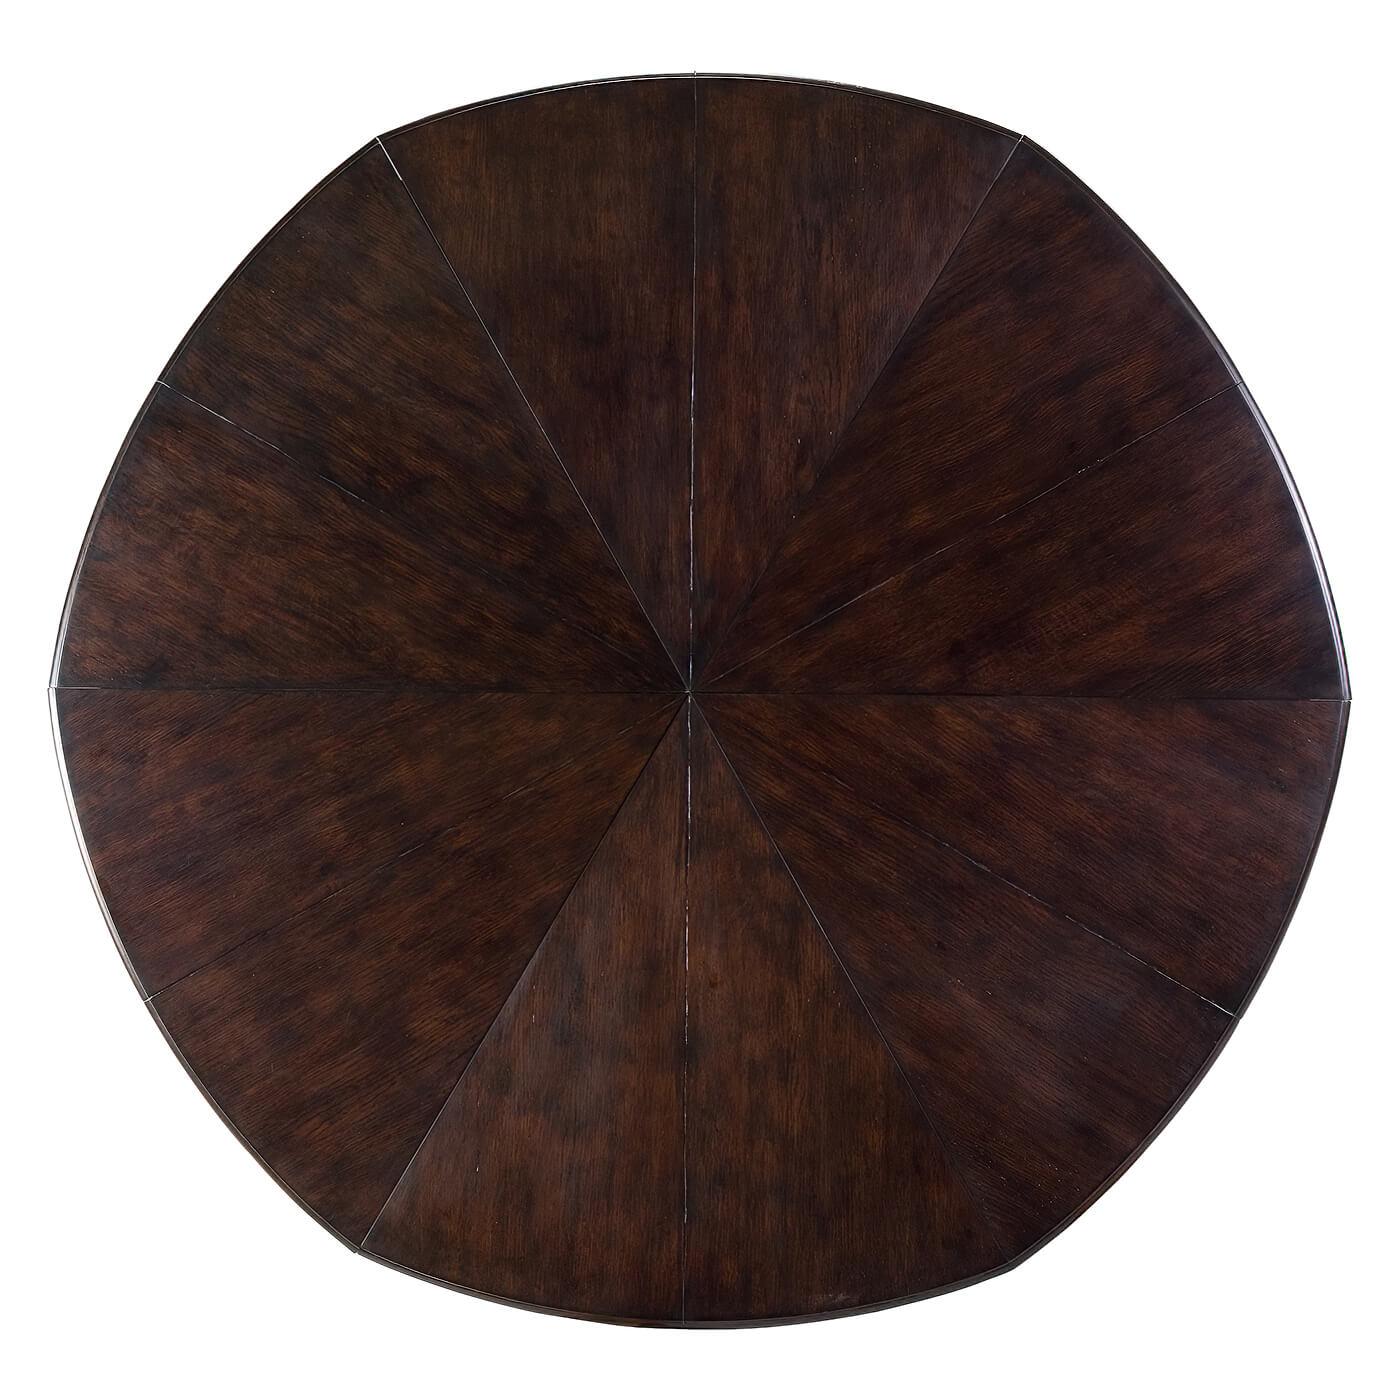 Asian Art Deco Style Round Dining Table For Sale